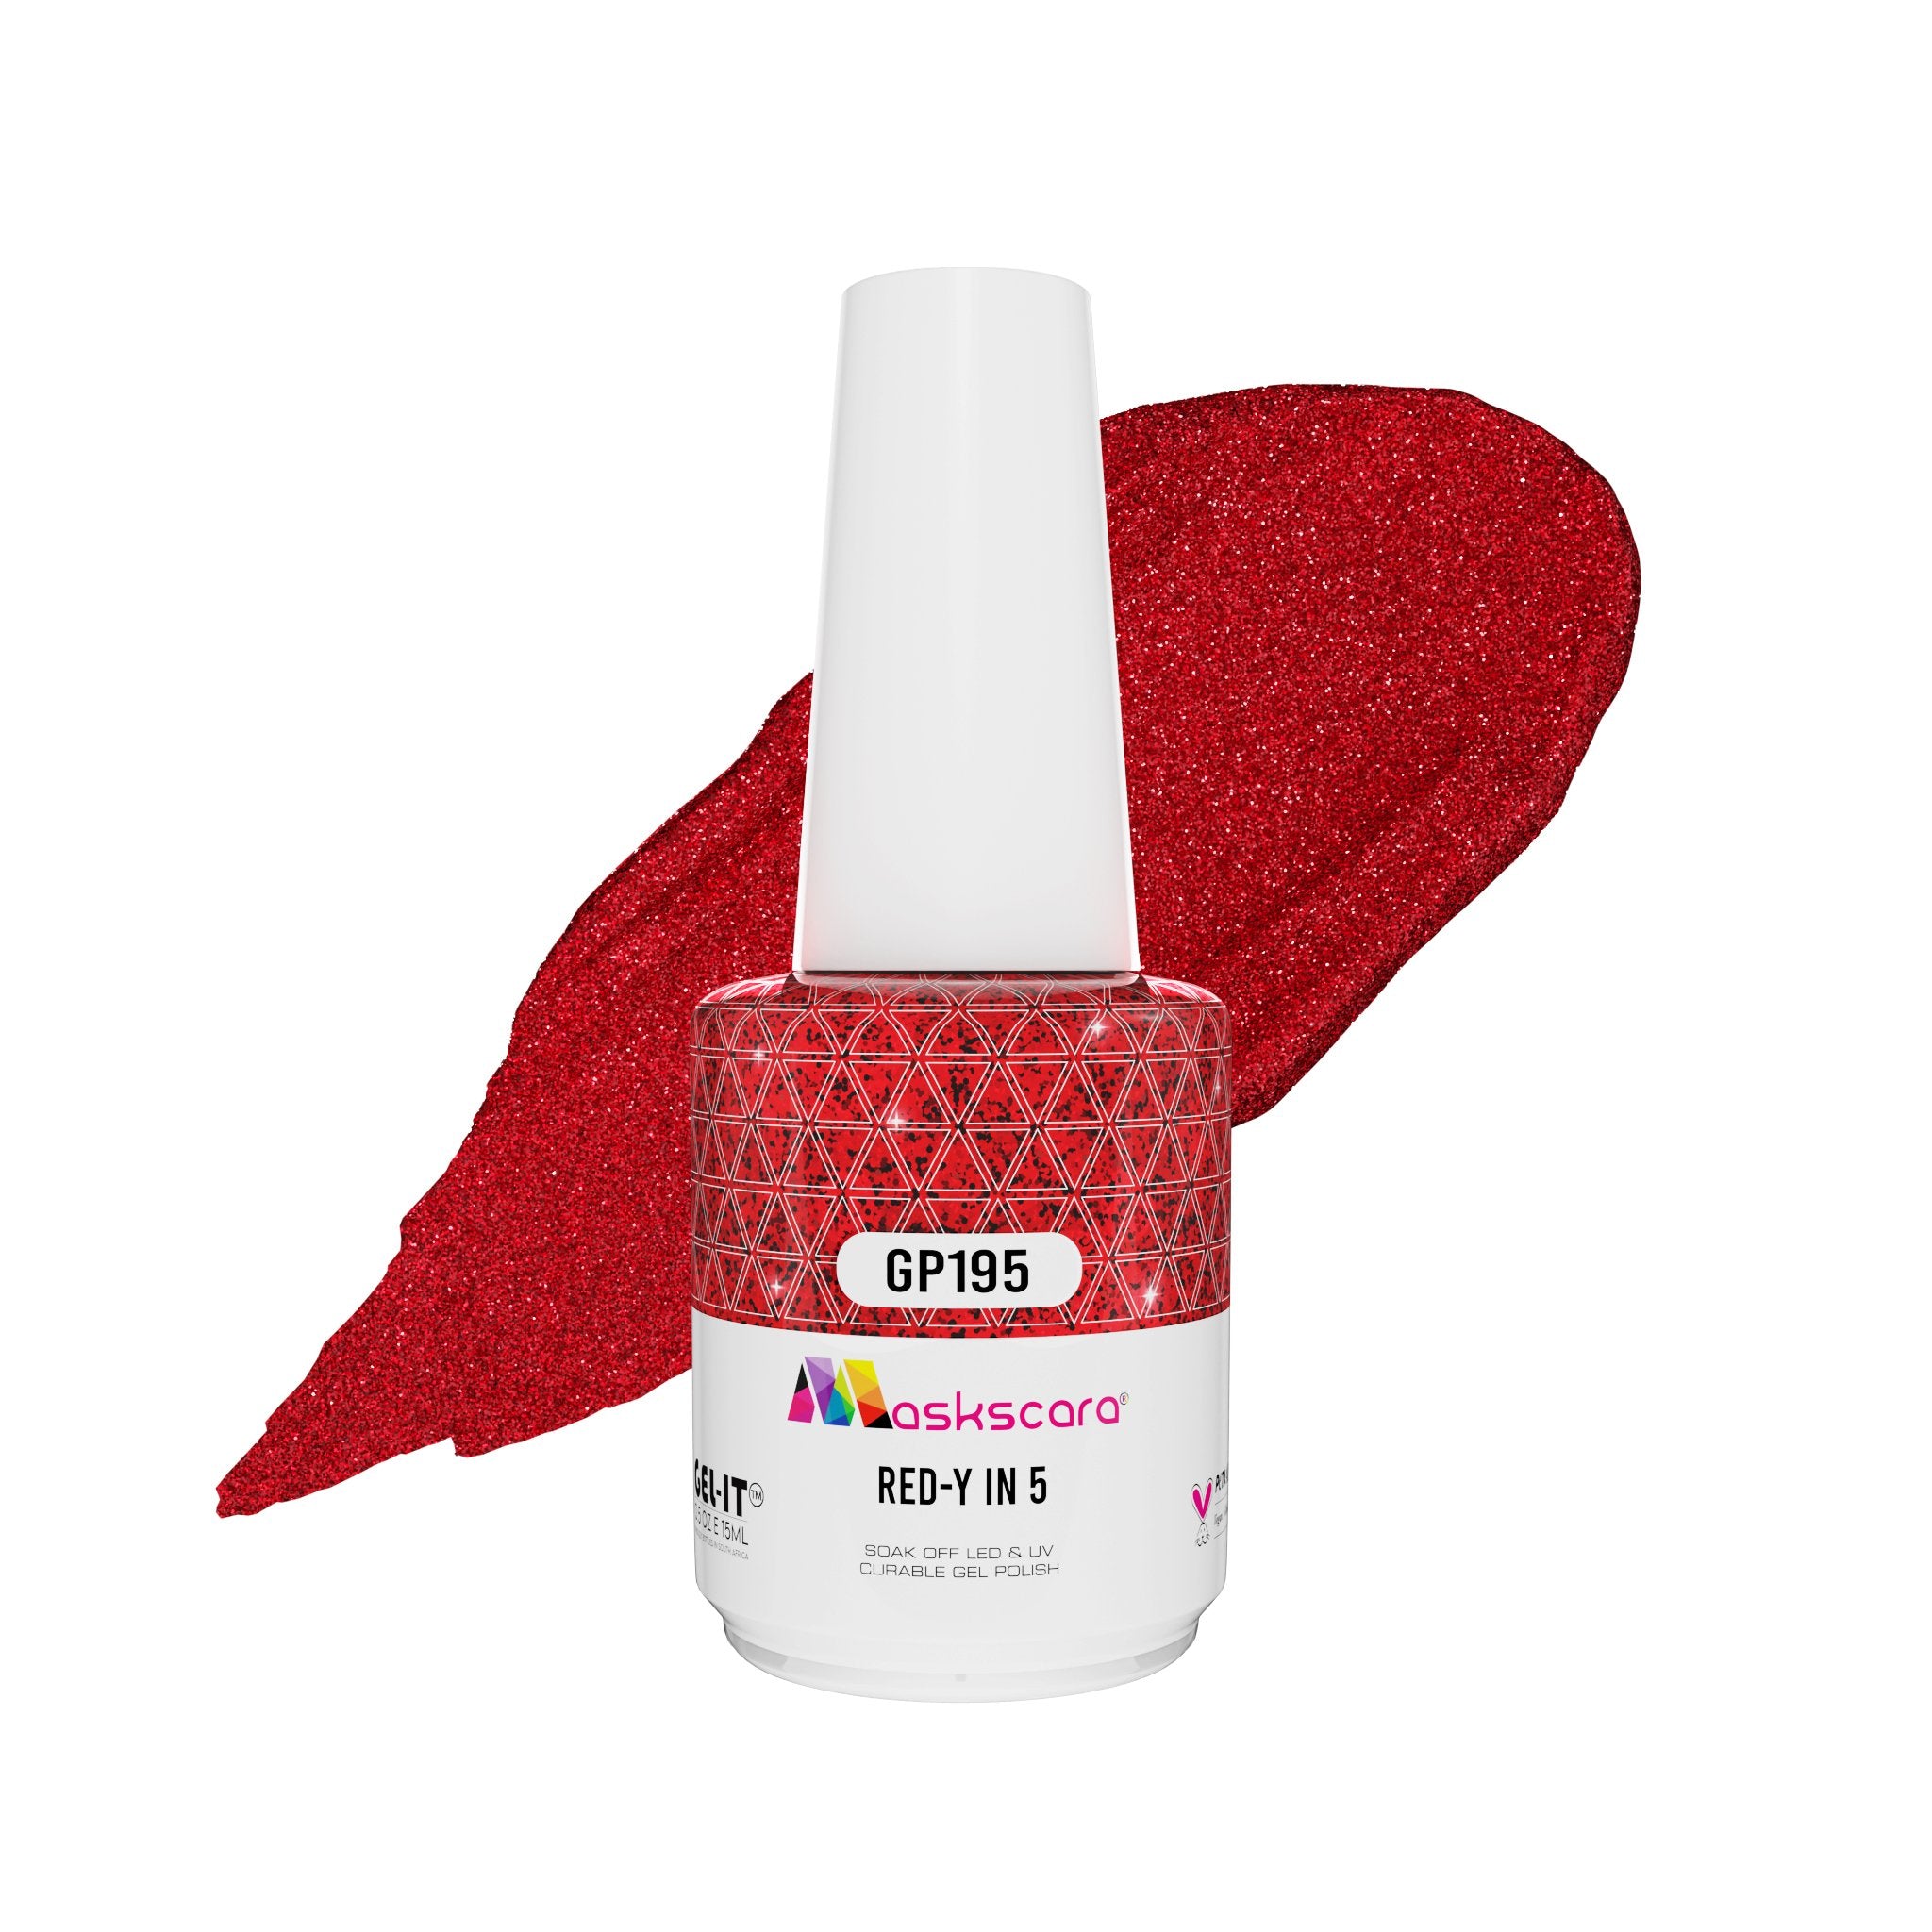 <img scr = “ GP195 Red-Y In 5.jpeg” alt = “Bright Pearl Red gel polish colour by the brand Maskscara”>